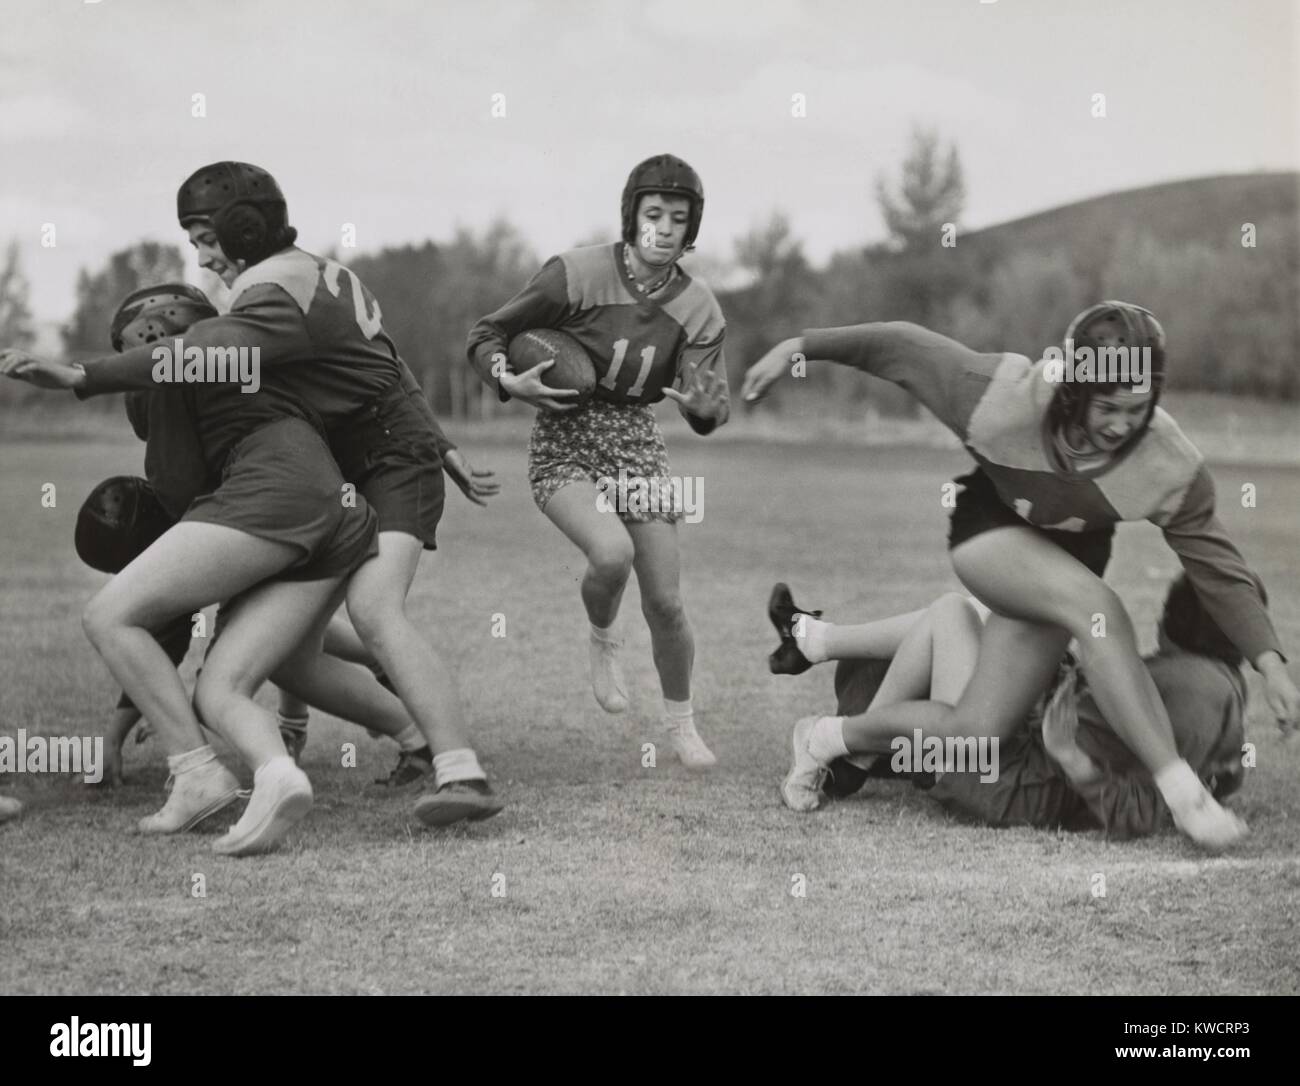 Coeds from Western State College staged their annual Powder Bowl football game. Oct. 14, 1939. Gunnison, Colorado. - (BSLOC 2015 1 221) Stock Photo